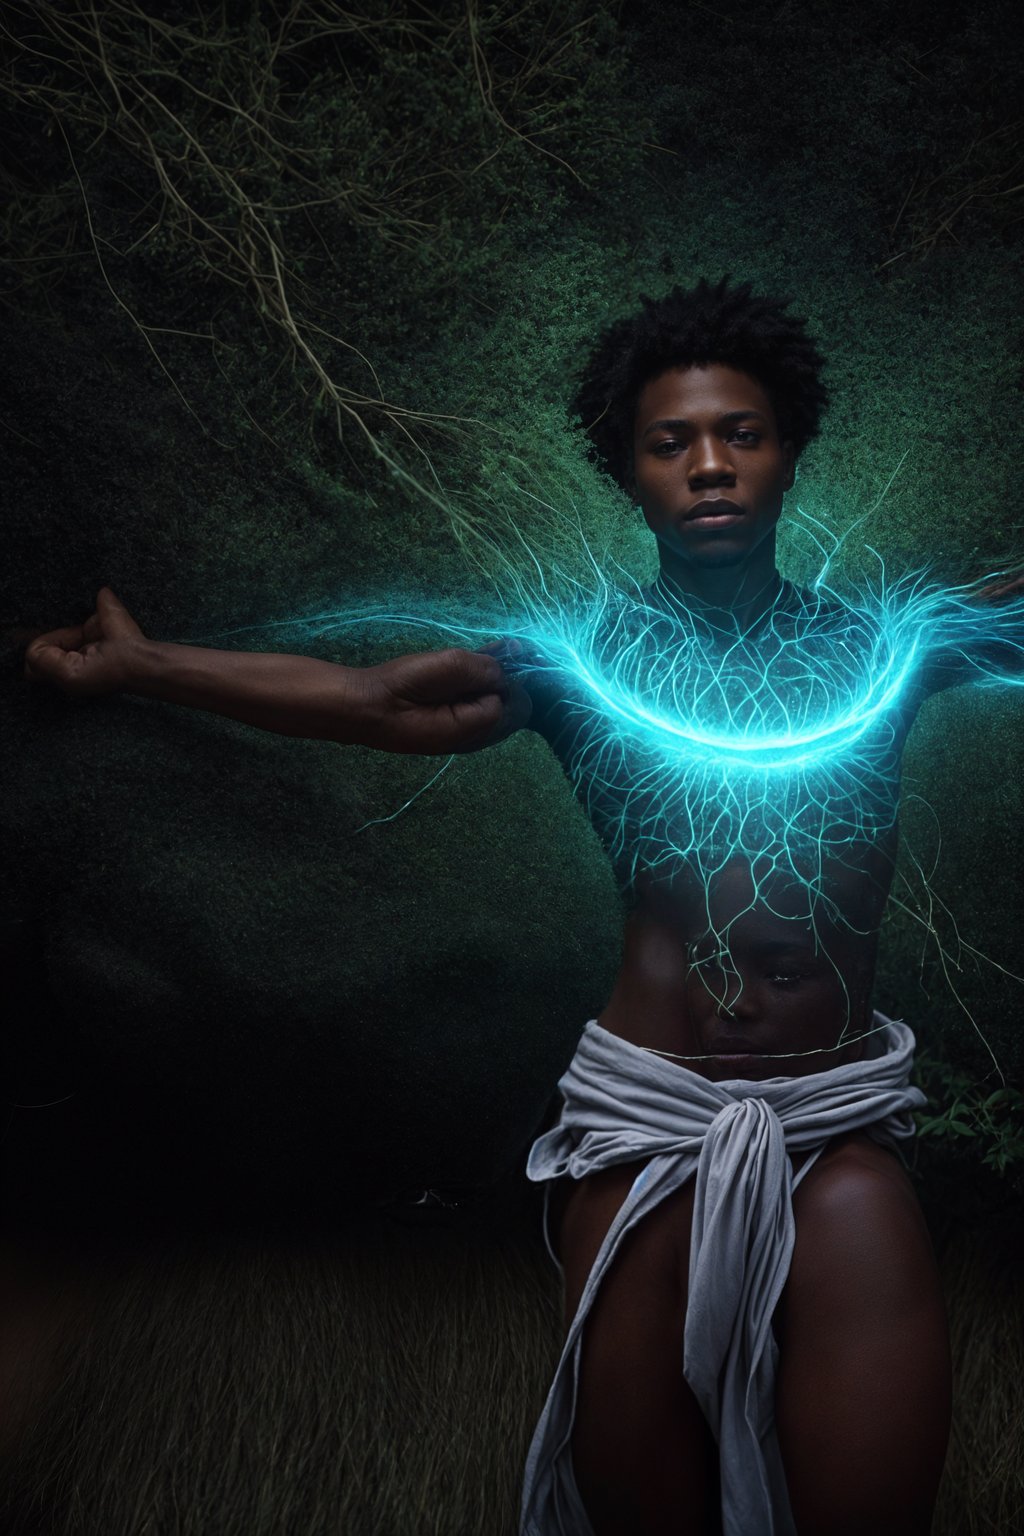 man receiving energy healing or participating in a healing circle, capturing the flow of healing energy and the restoration of balance